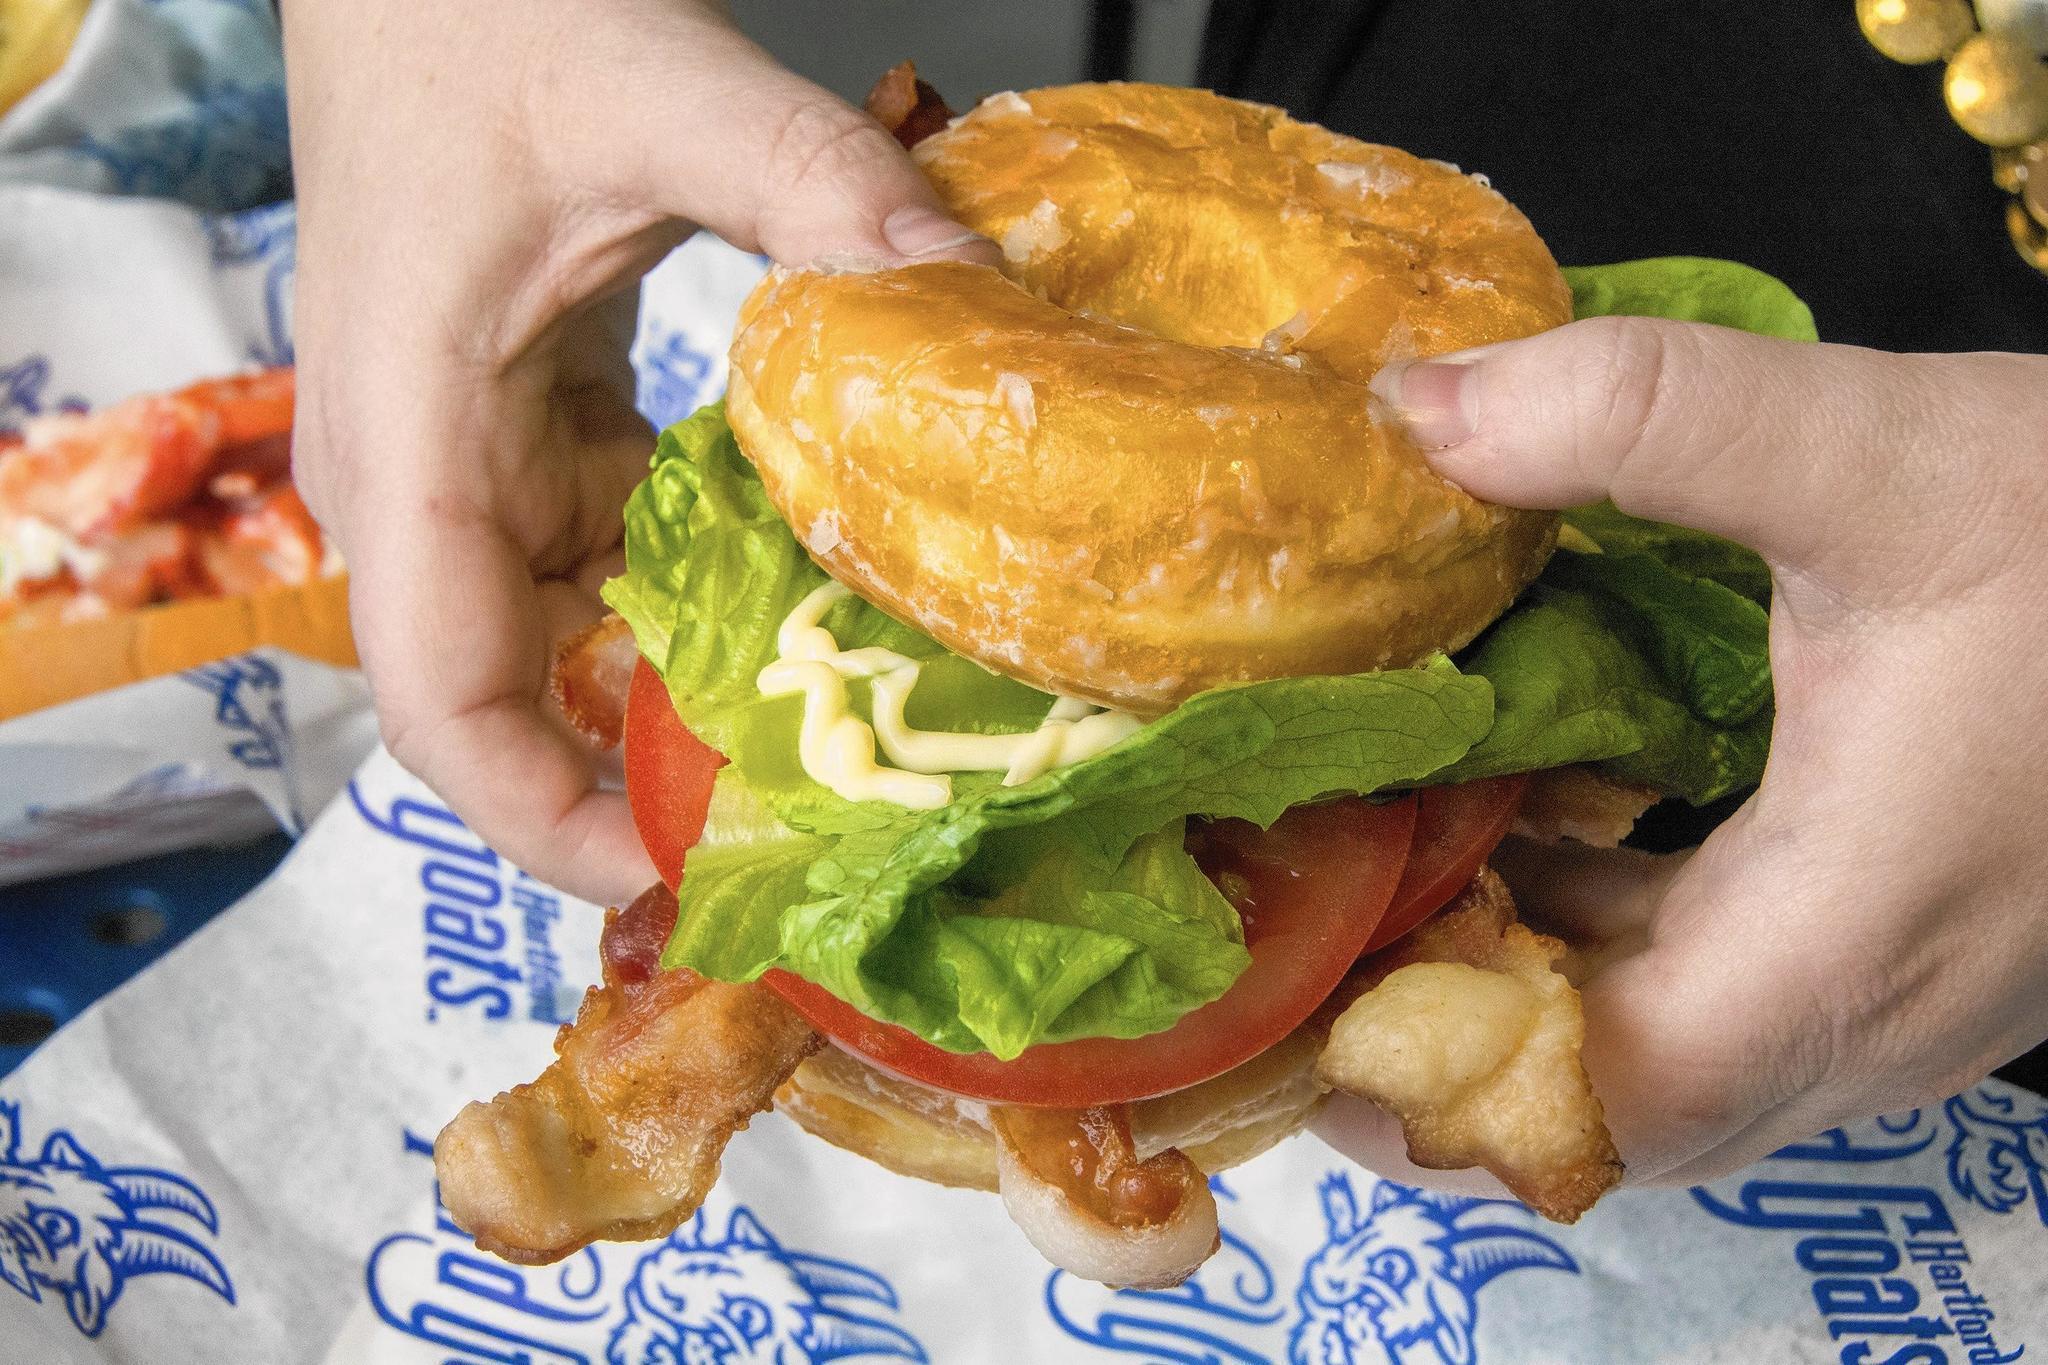 #EatItUp: Yard Goats Food Stands To Give Fans Plenty To Graze On